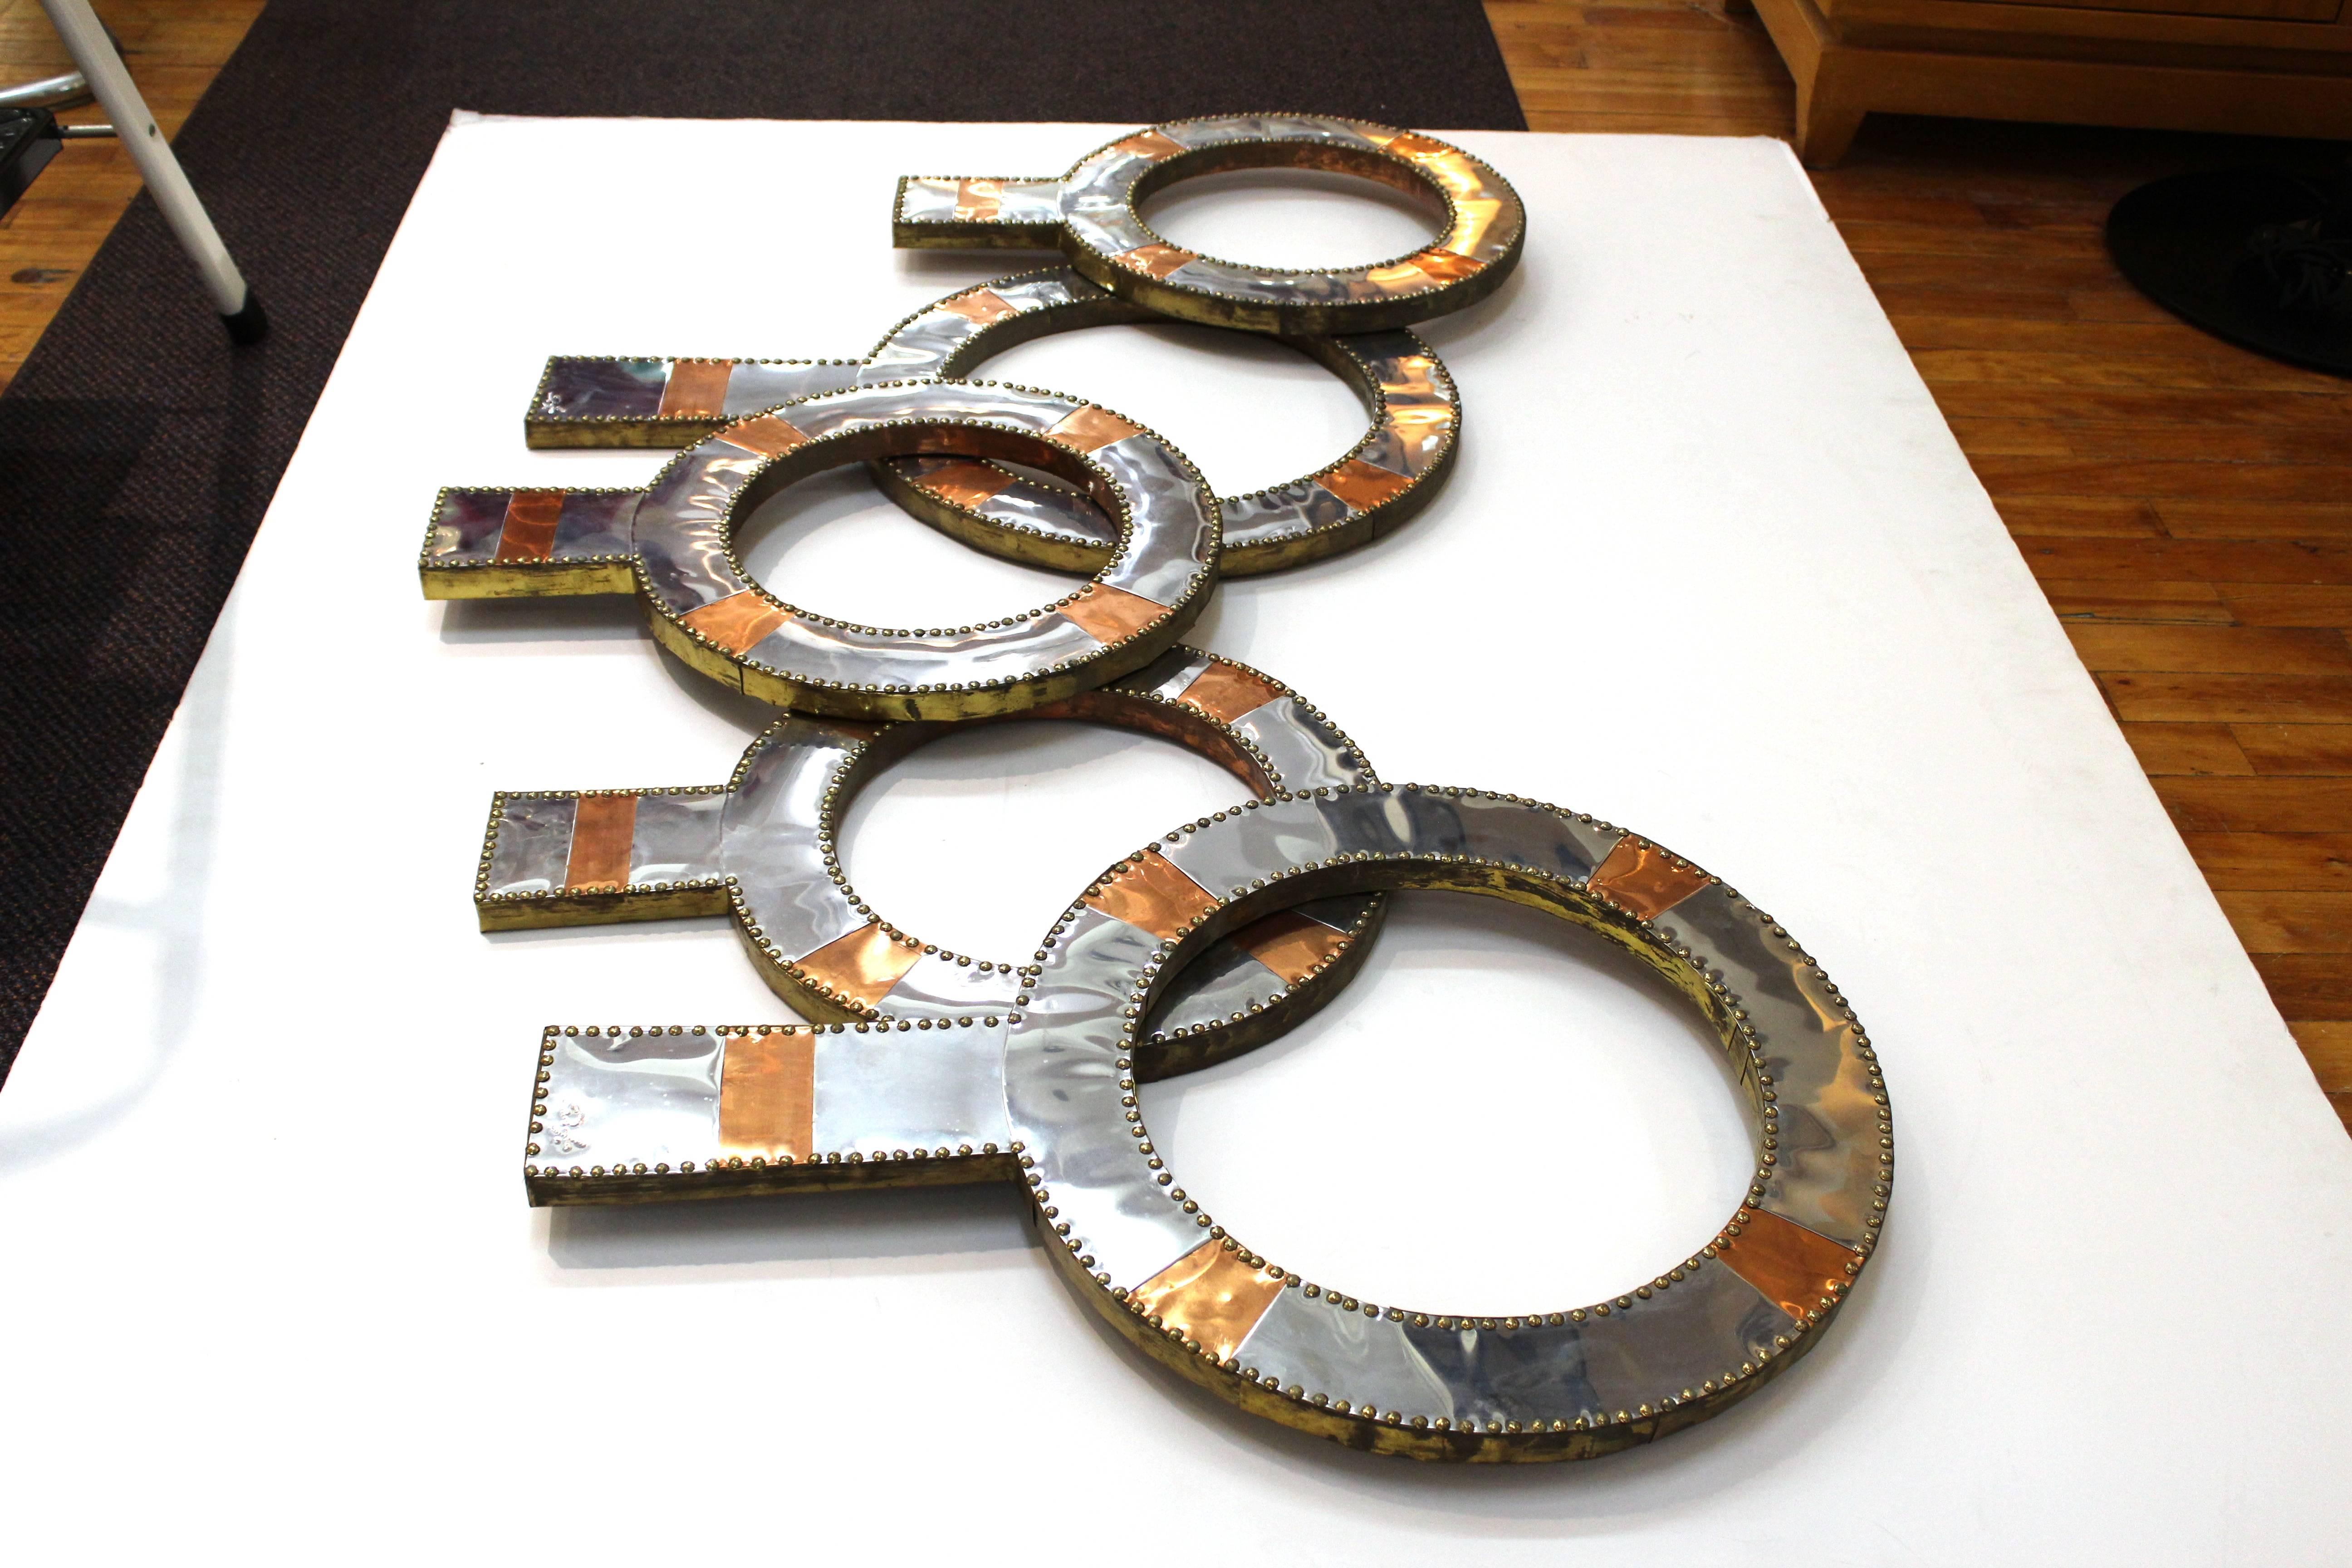 A wall sculpture by Don Freedman in the form of five overlapping rings of various sizes with two tones of metal. Initialed by the artist at the bottom of two rings.